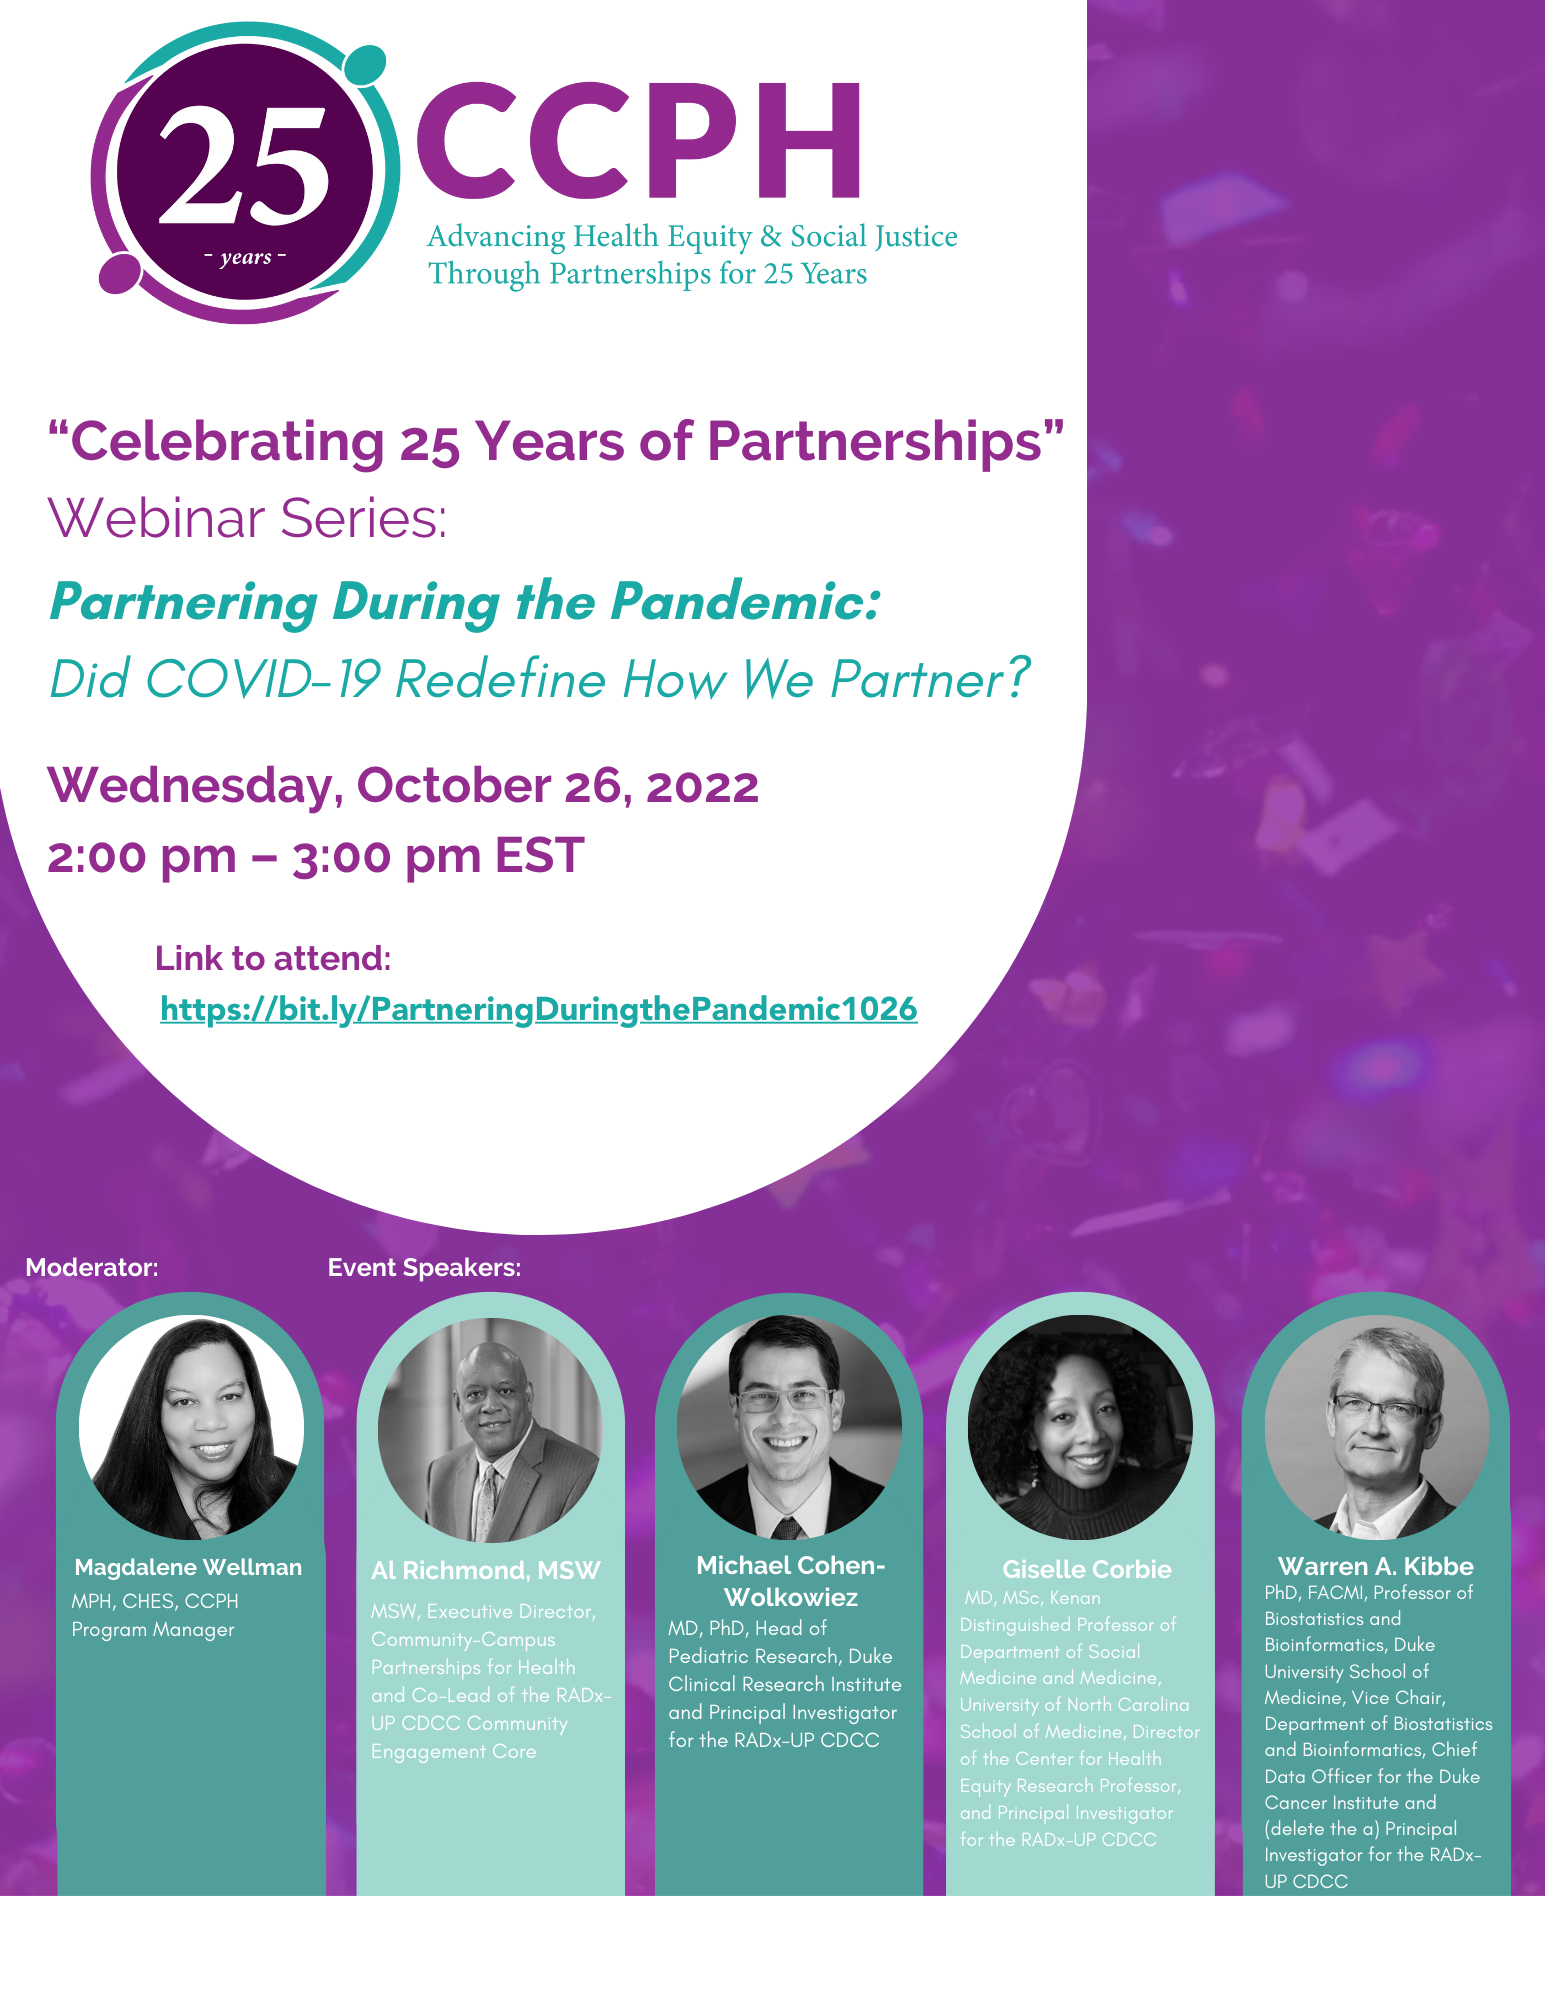 Individual Webinar Post: Partnering During the Pandemic: Did COVID-19 Redefine How We Partner?